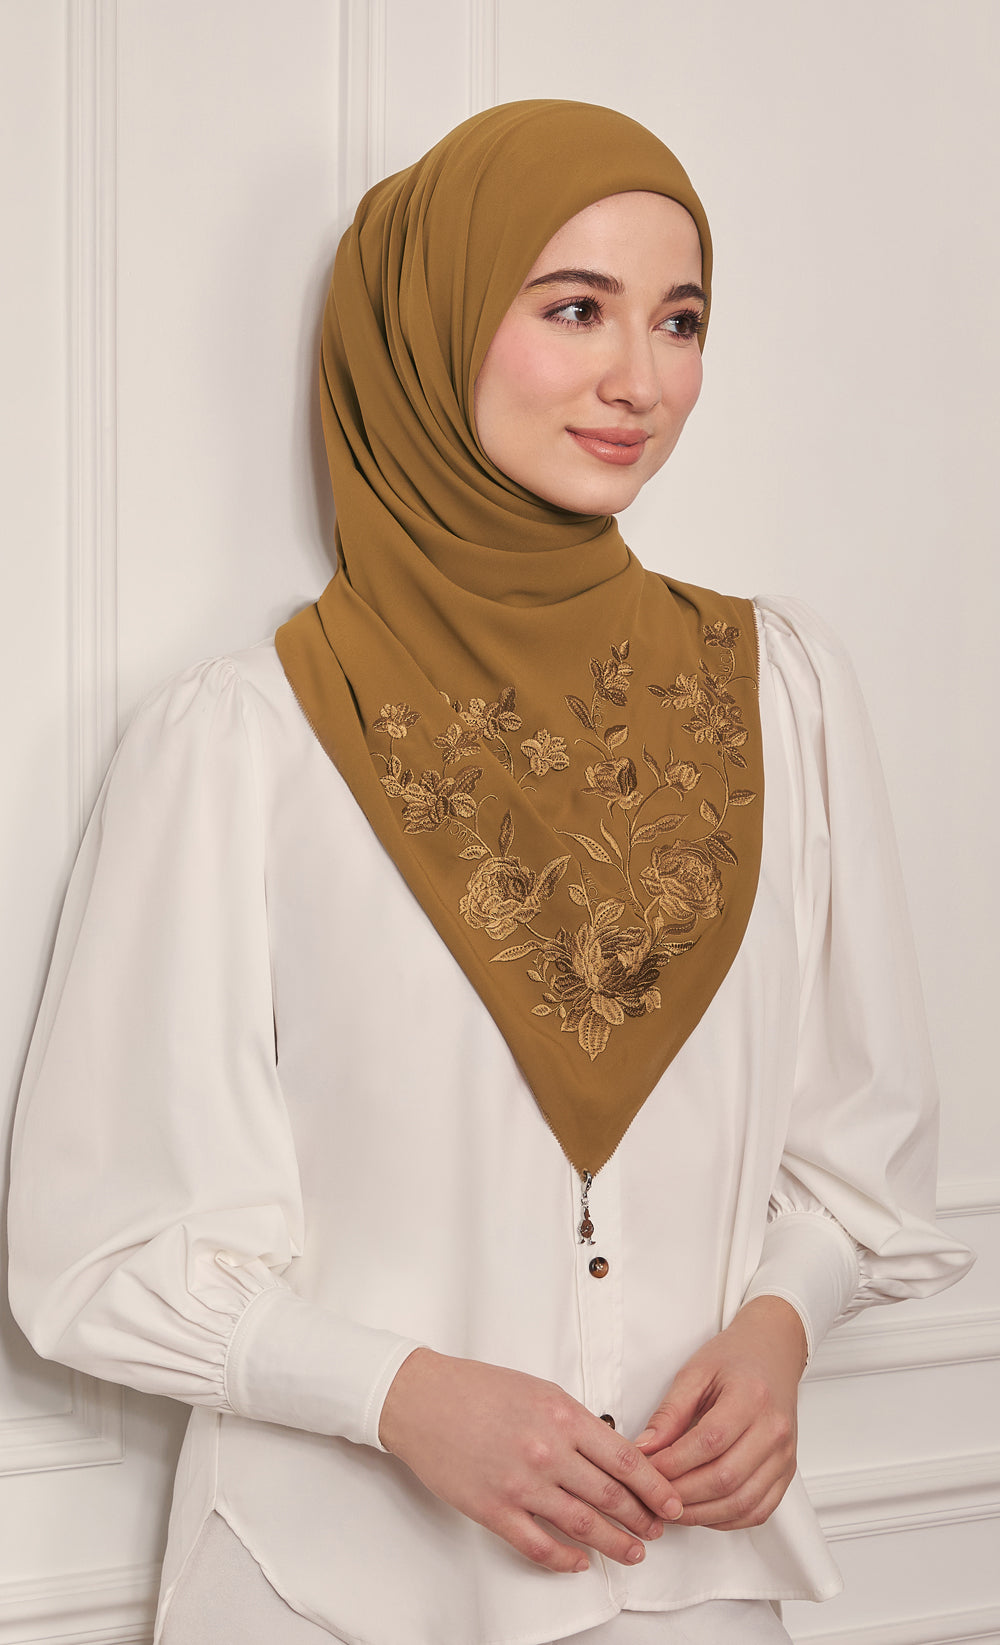 The Peonies Embroidery dUCk Square Scarf in Caramel